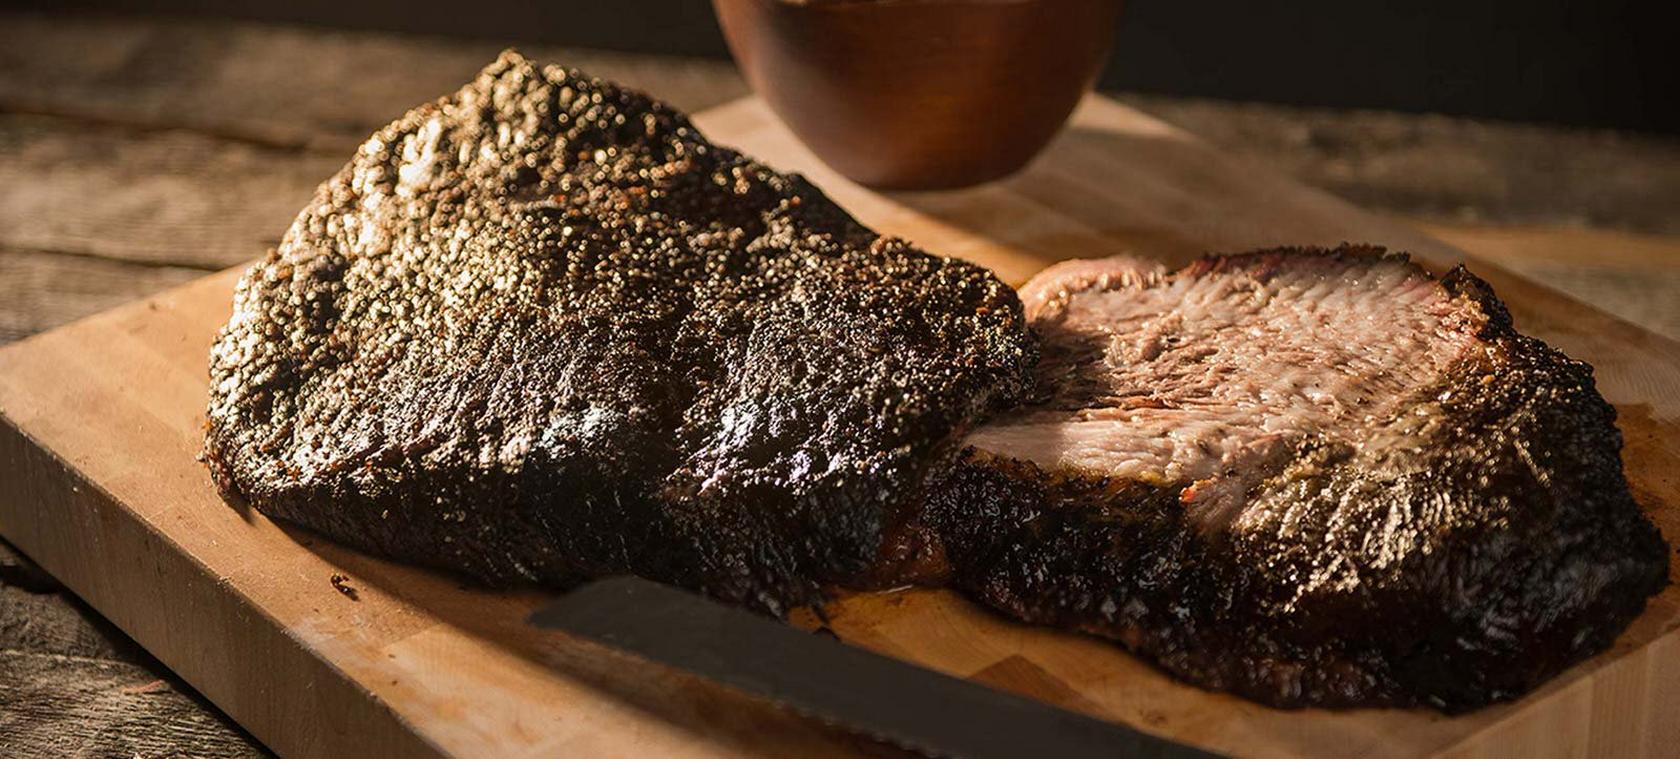 How To Cook A Full Packer Brisket